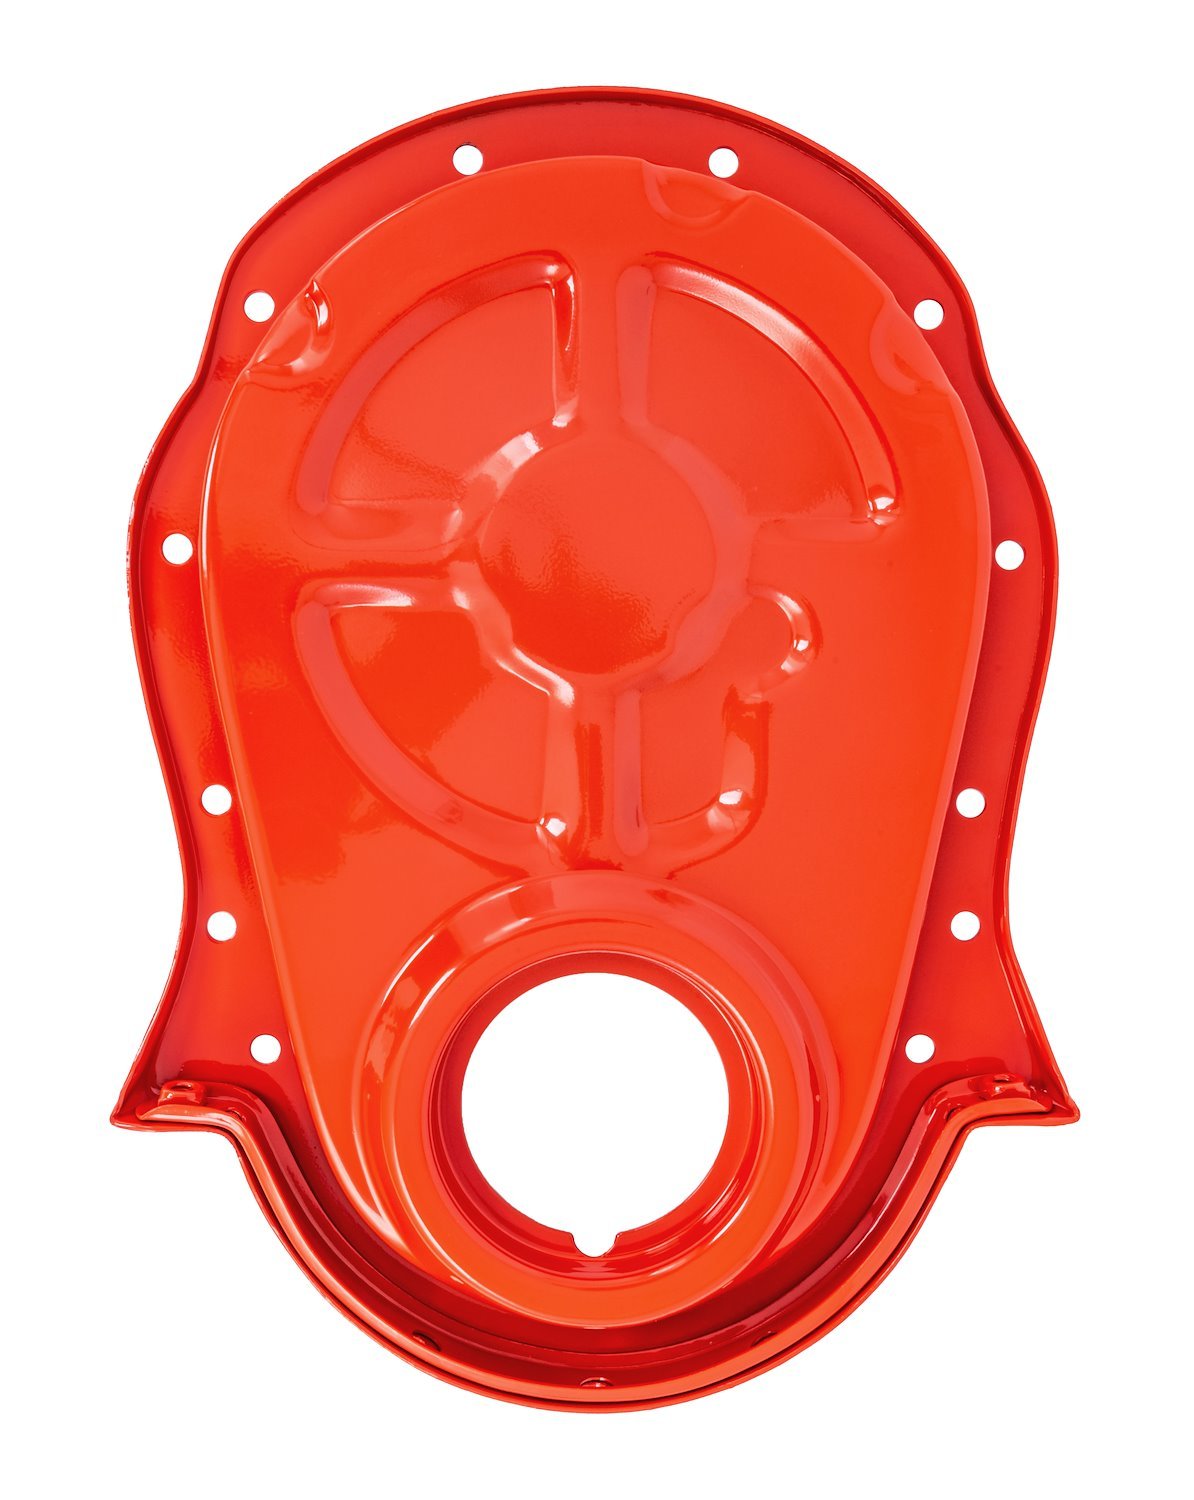 Timing Cover for 1965-1990 Big Block Chevy Gen IV [Orange]